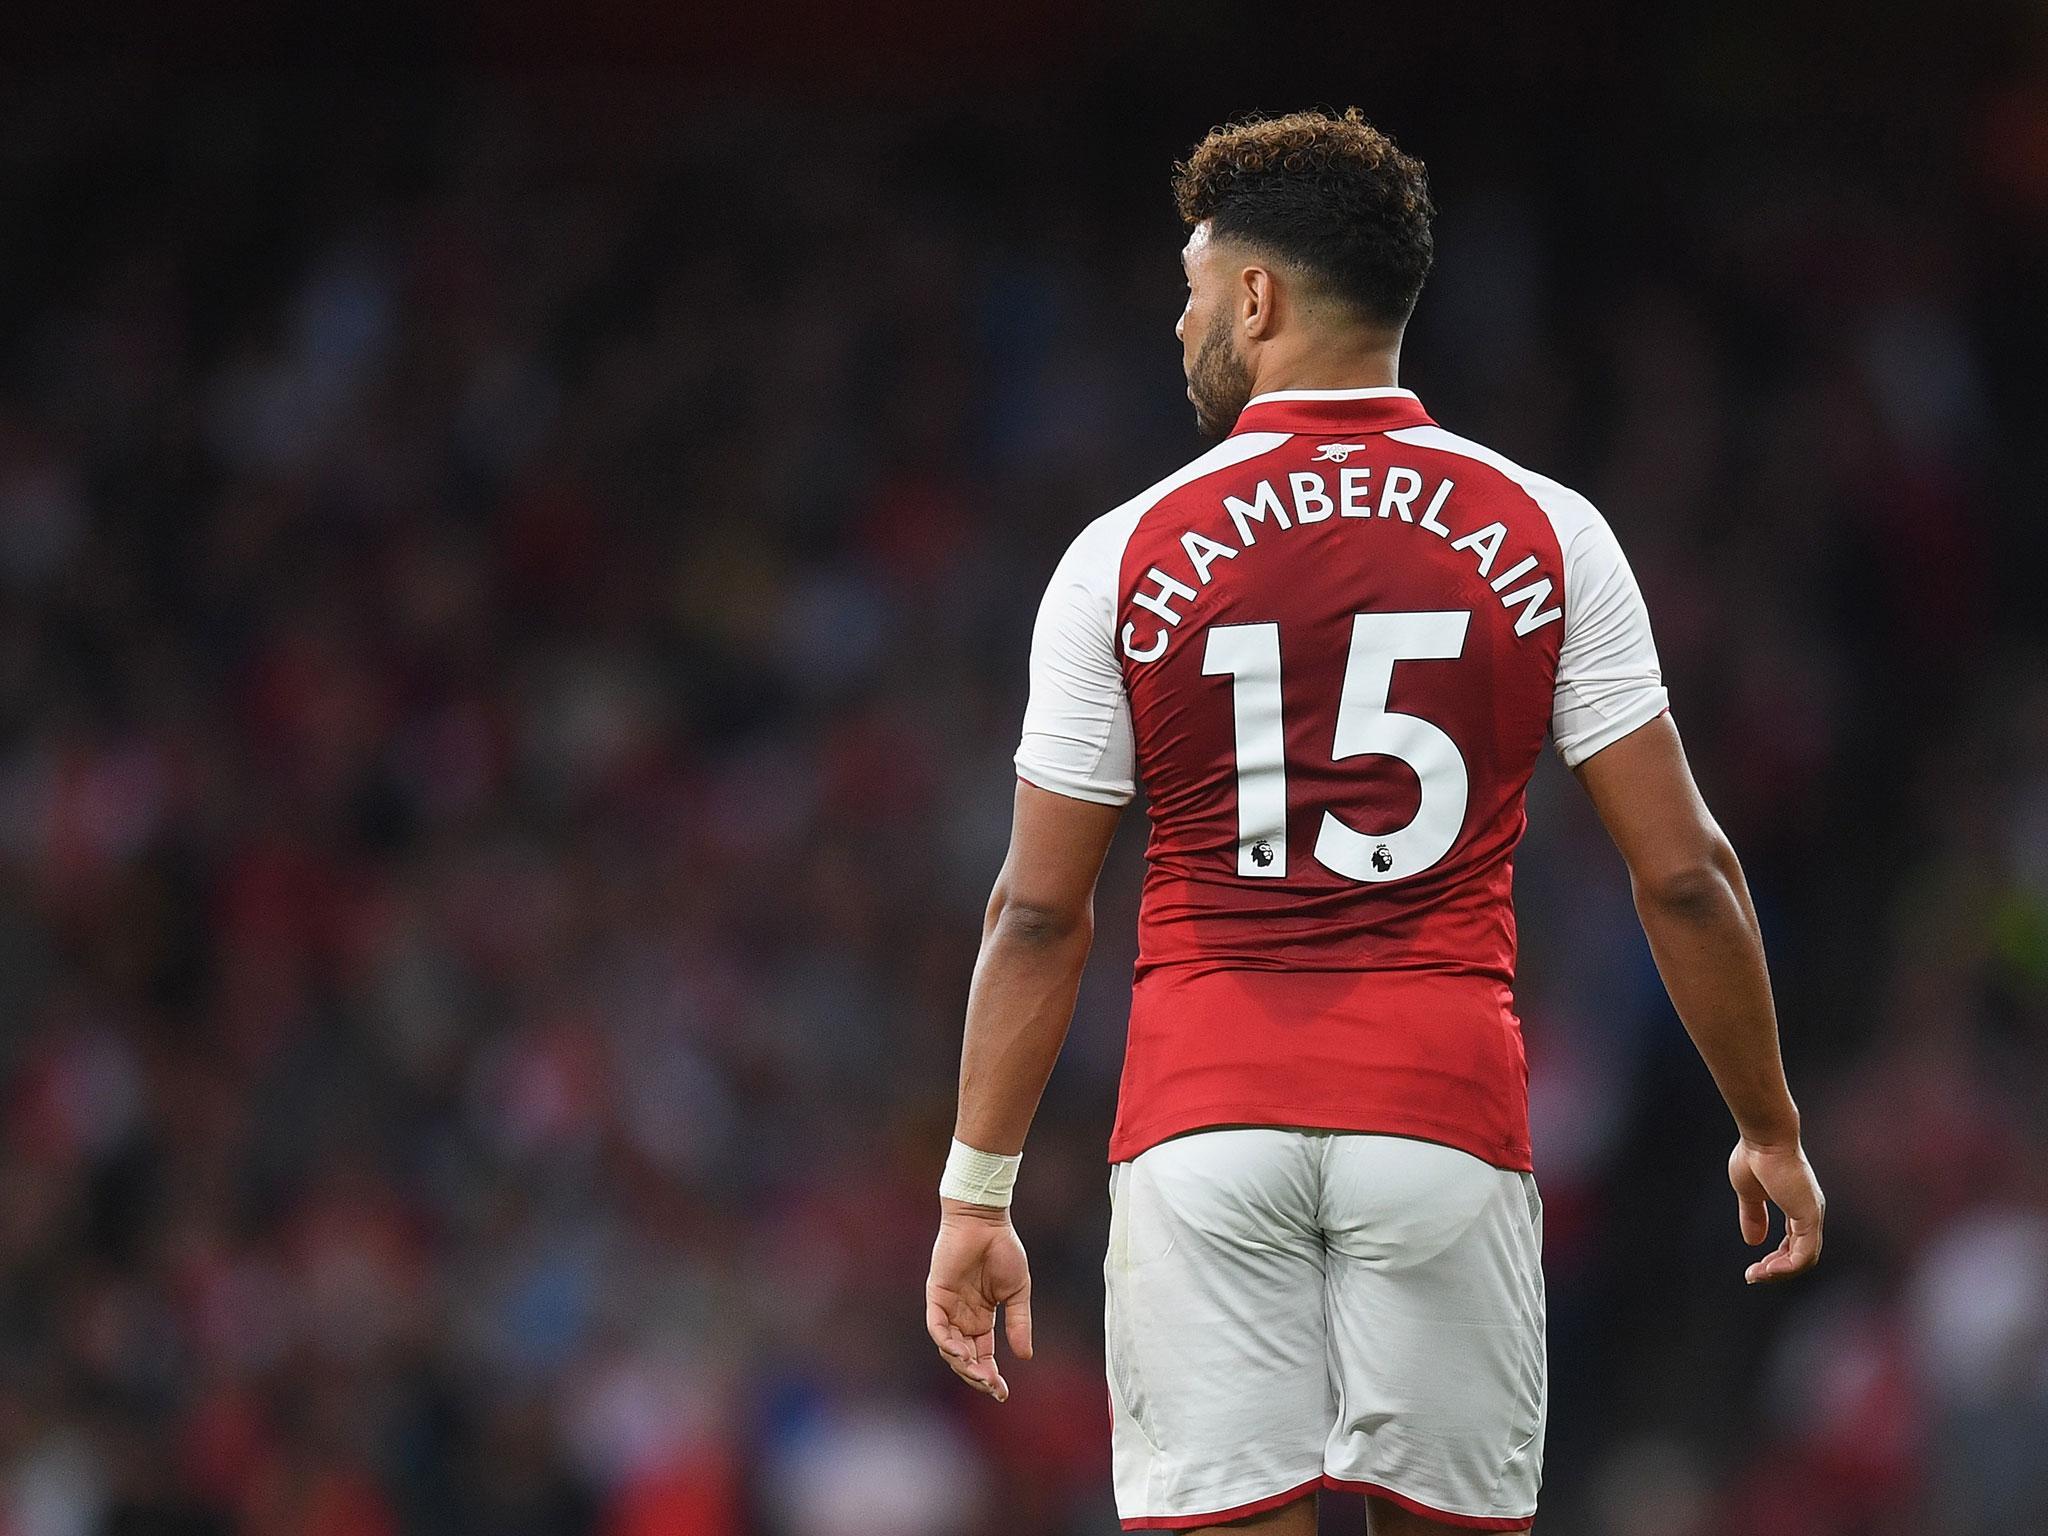 Arsene Wenger is adamant Oxlade-Chamberlain won't be sold this summer